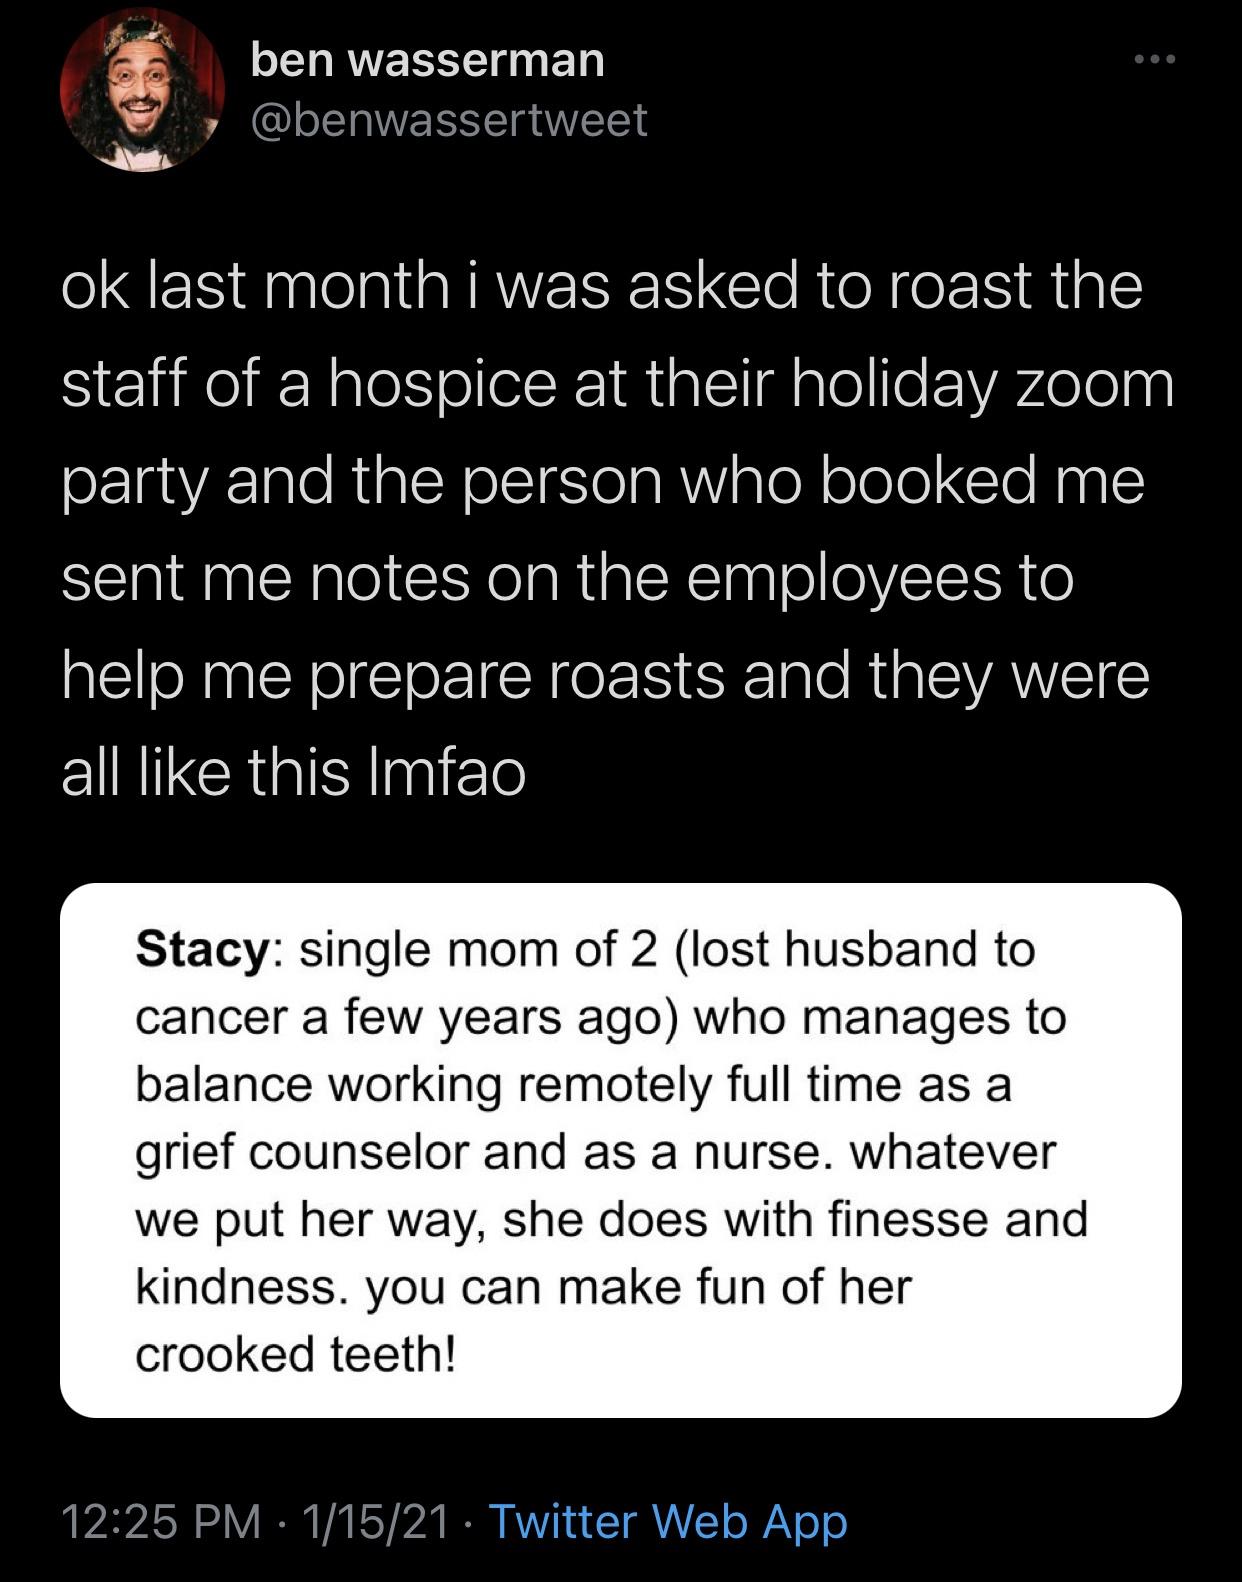 kimlip - ben wasserman ok last month i was asked to roast the staff of a hospice at their holiday zoom party and the person who booked me sent me notes on the employees to help me prepare roasts and they were all this Imfao Stacy single mom of 2 lost husb